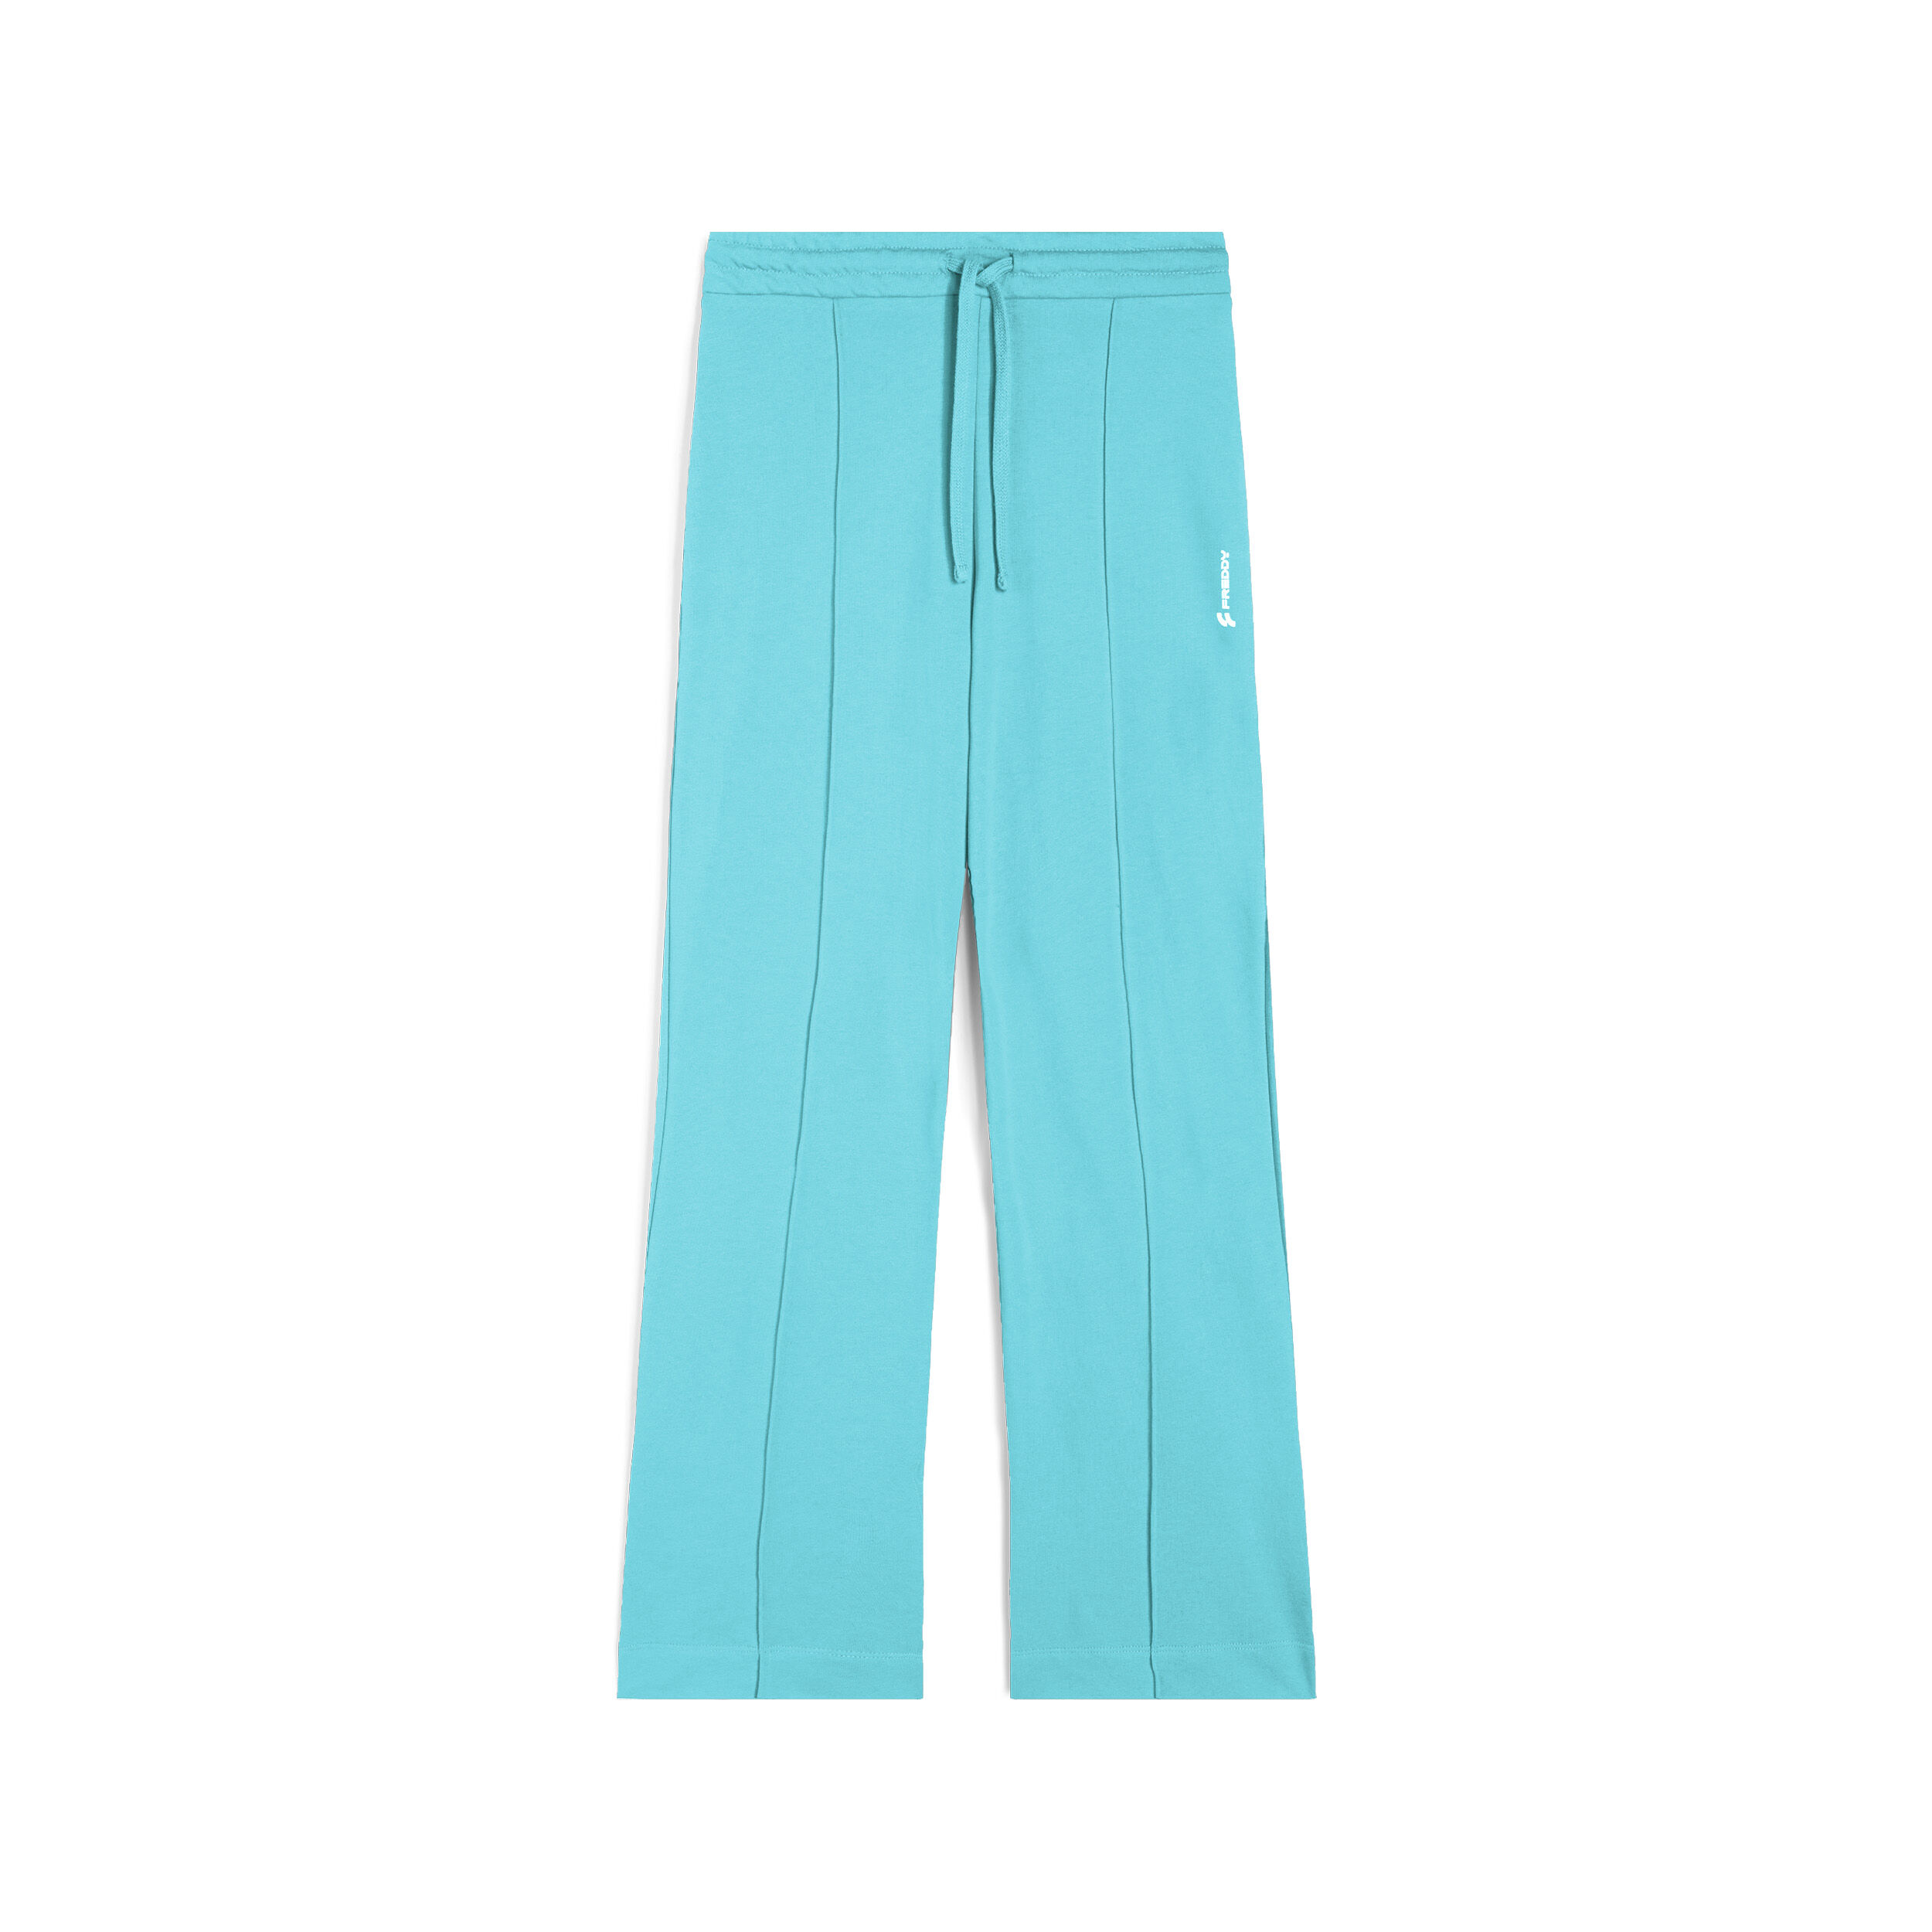 Freddy Pantaloni ampi in french terry decorati da piping centrale Blue Radiance Donna Large